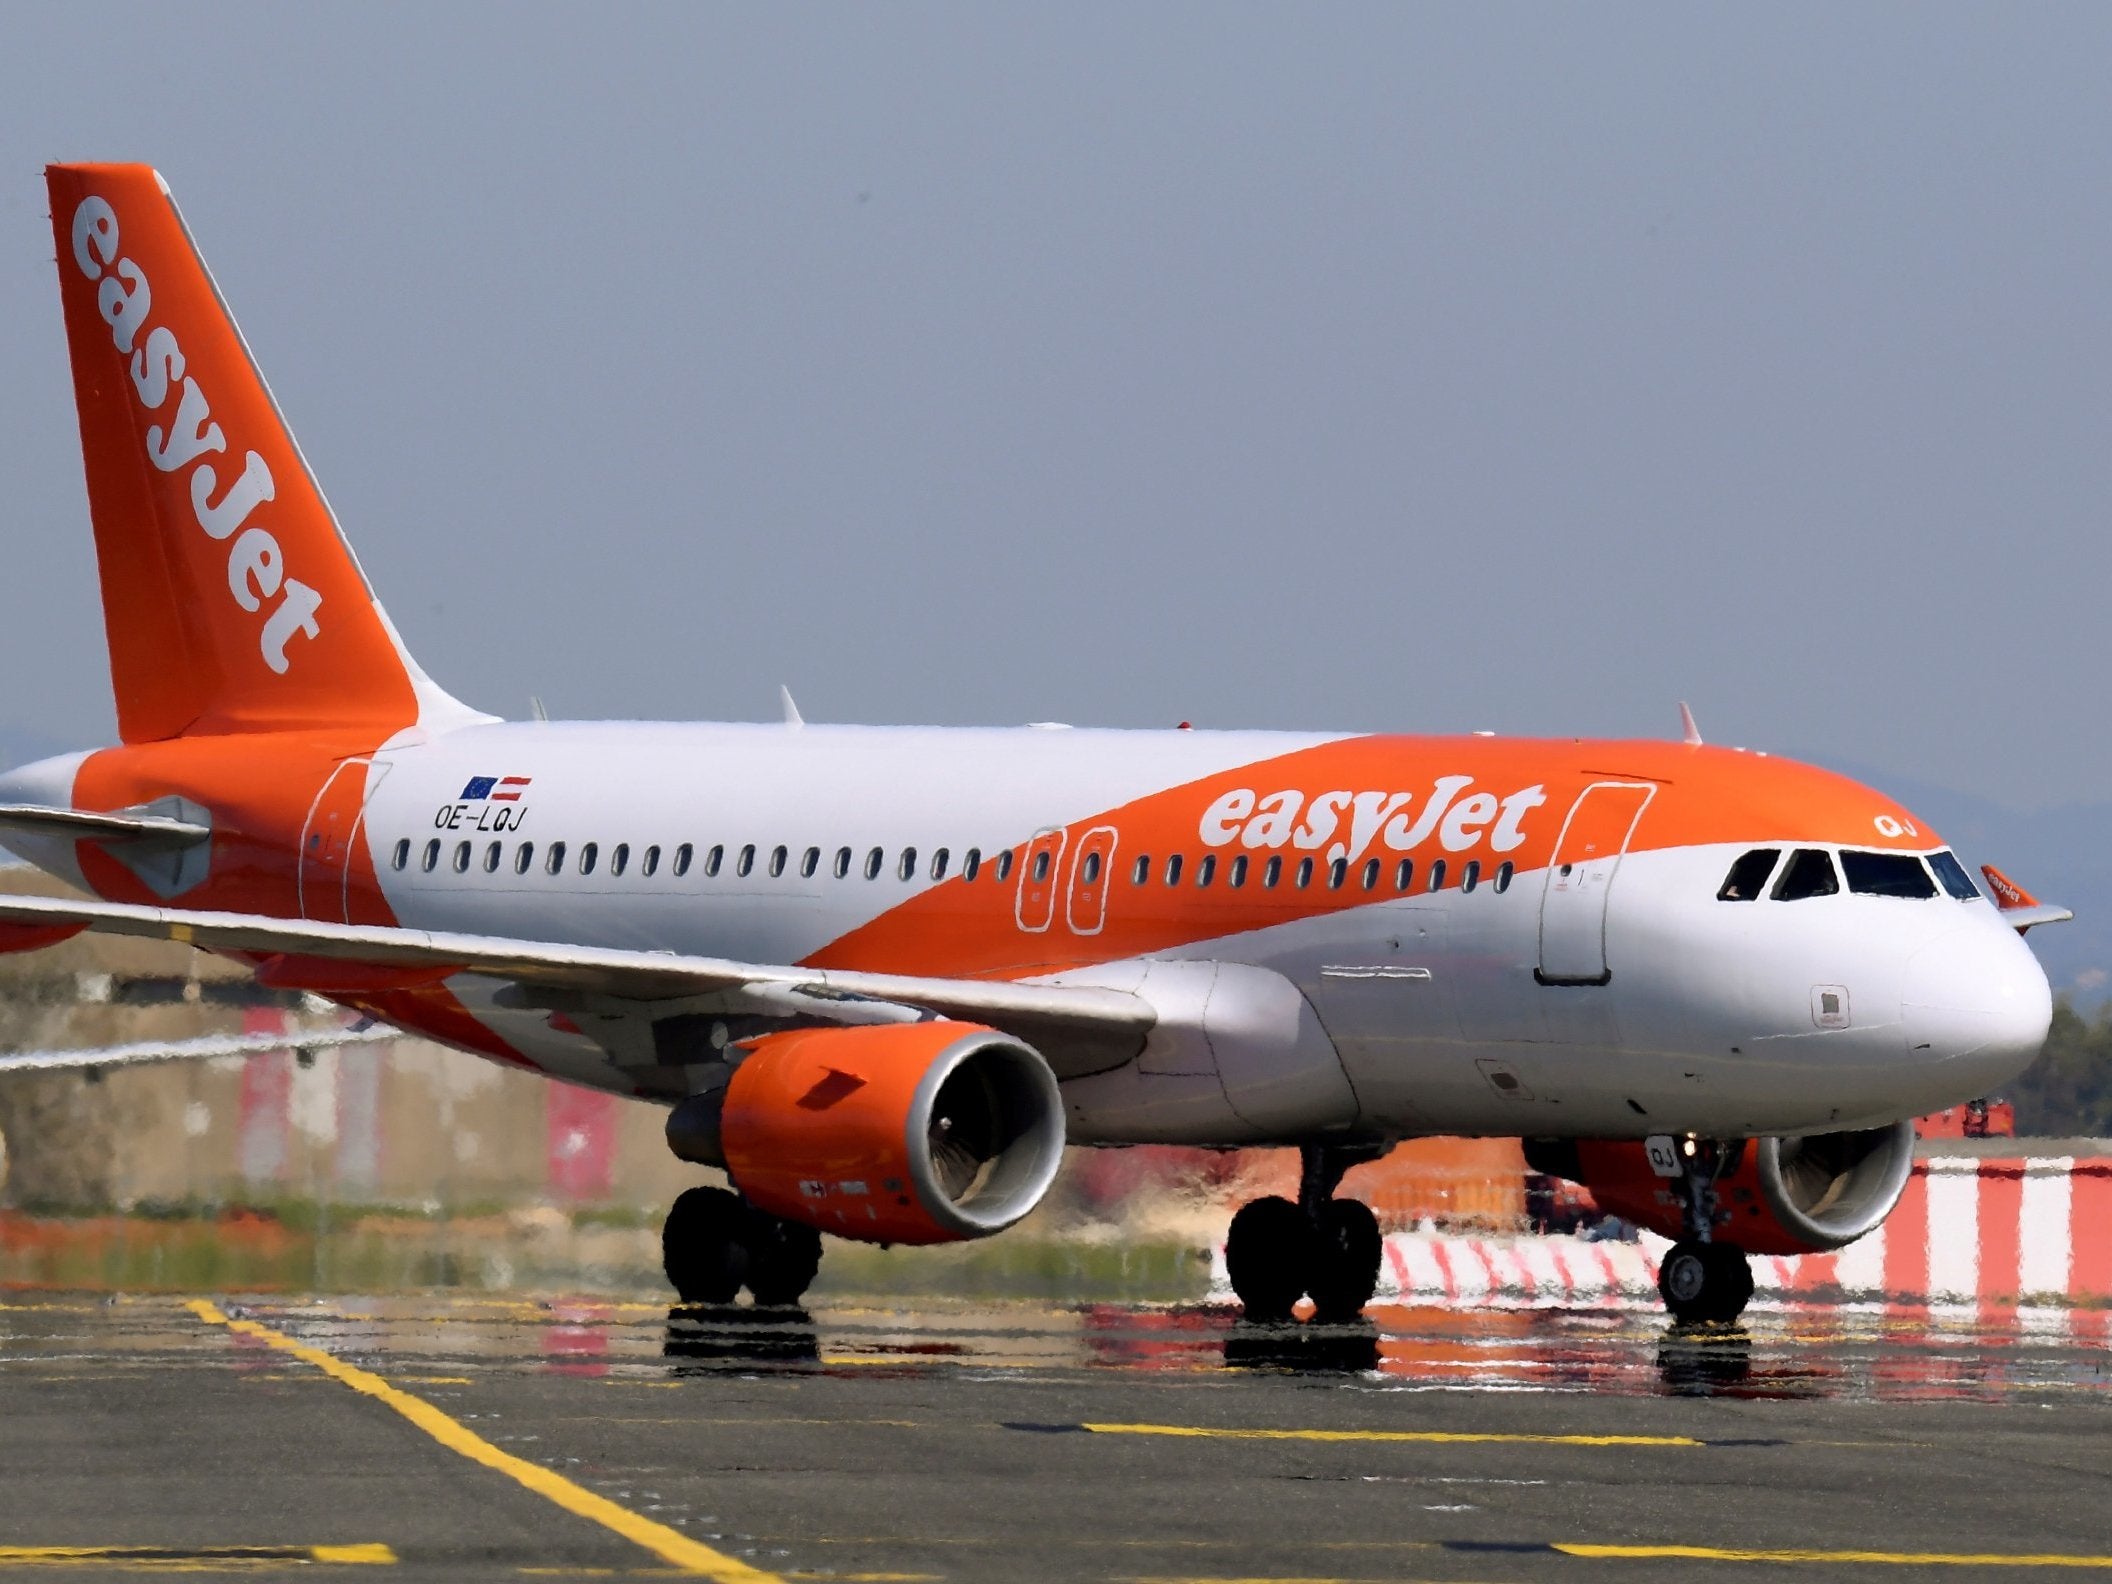 EasyJet passengers were diverted because of a runway closure